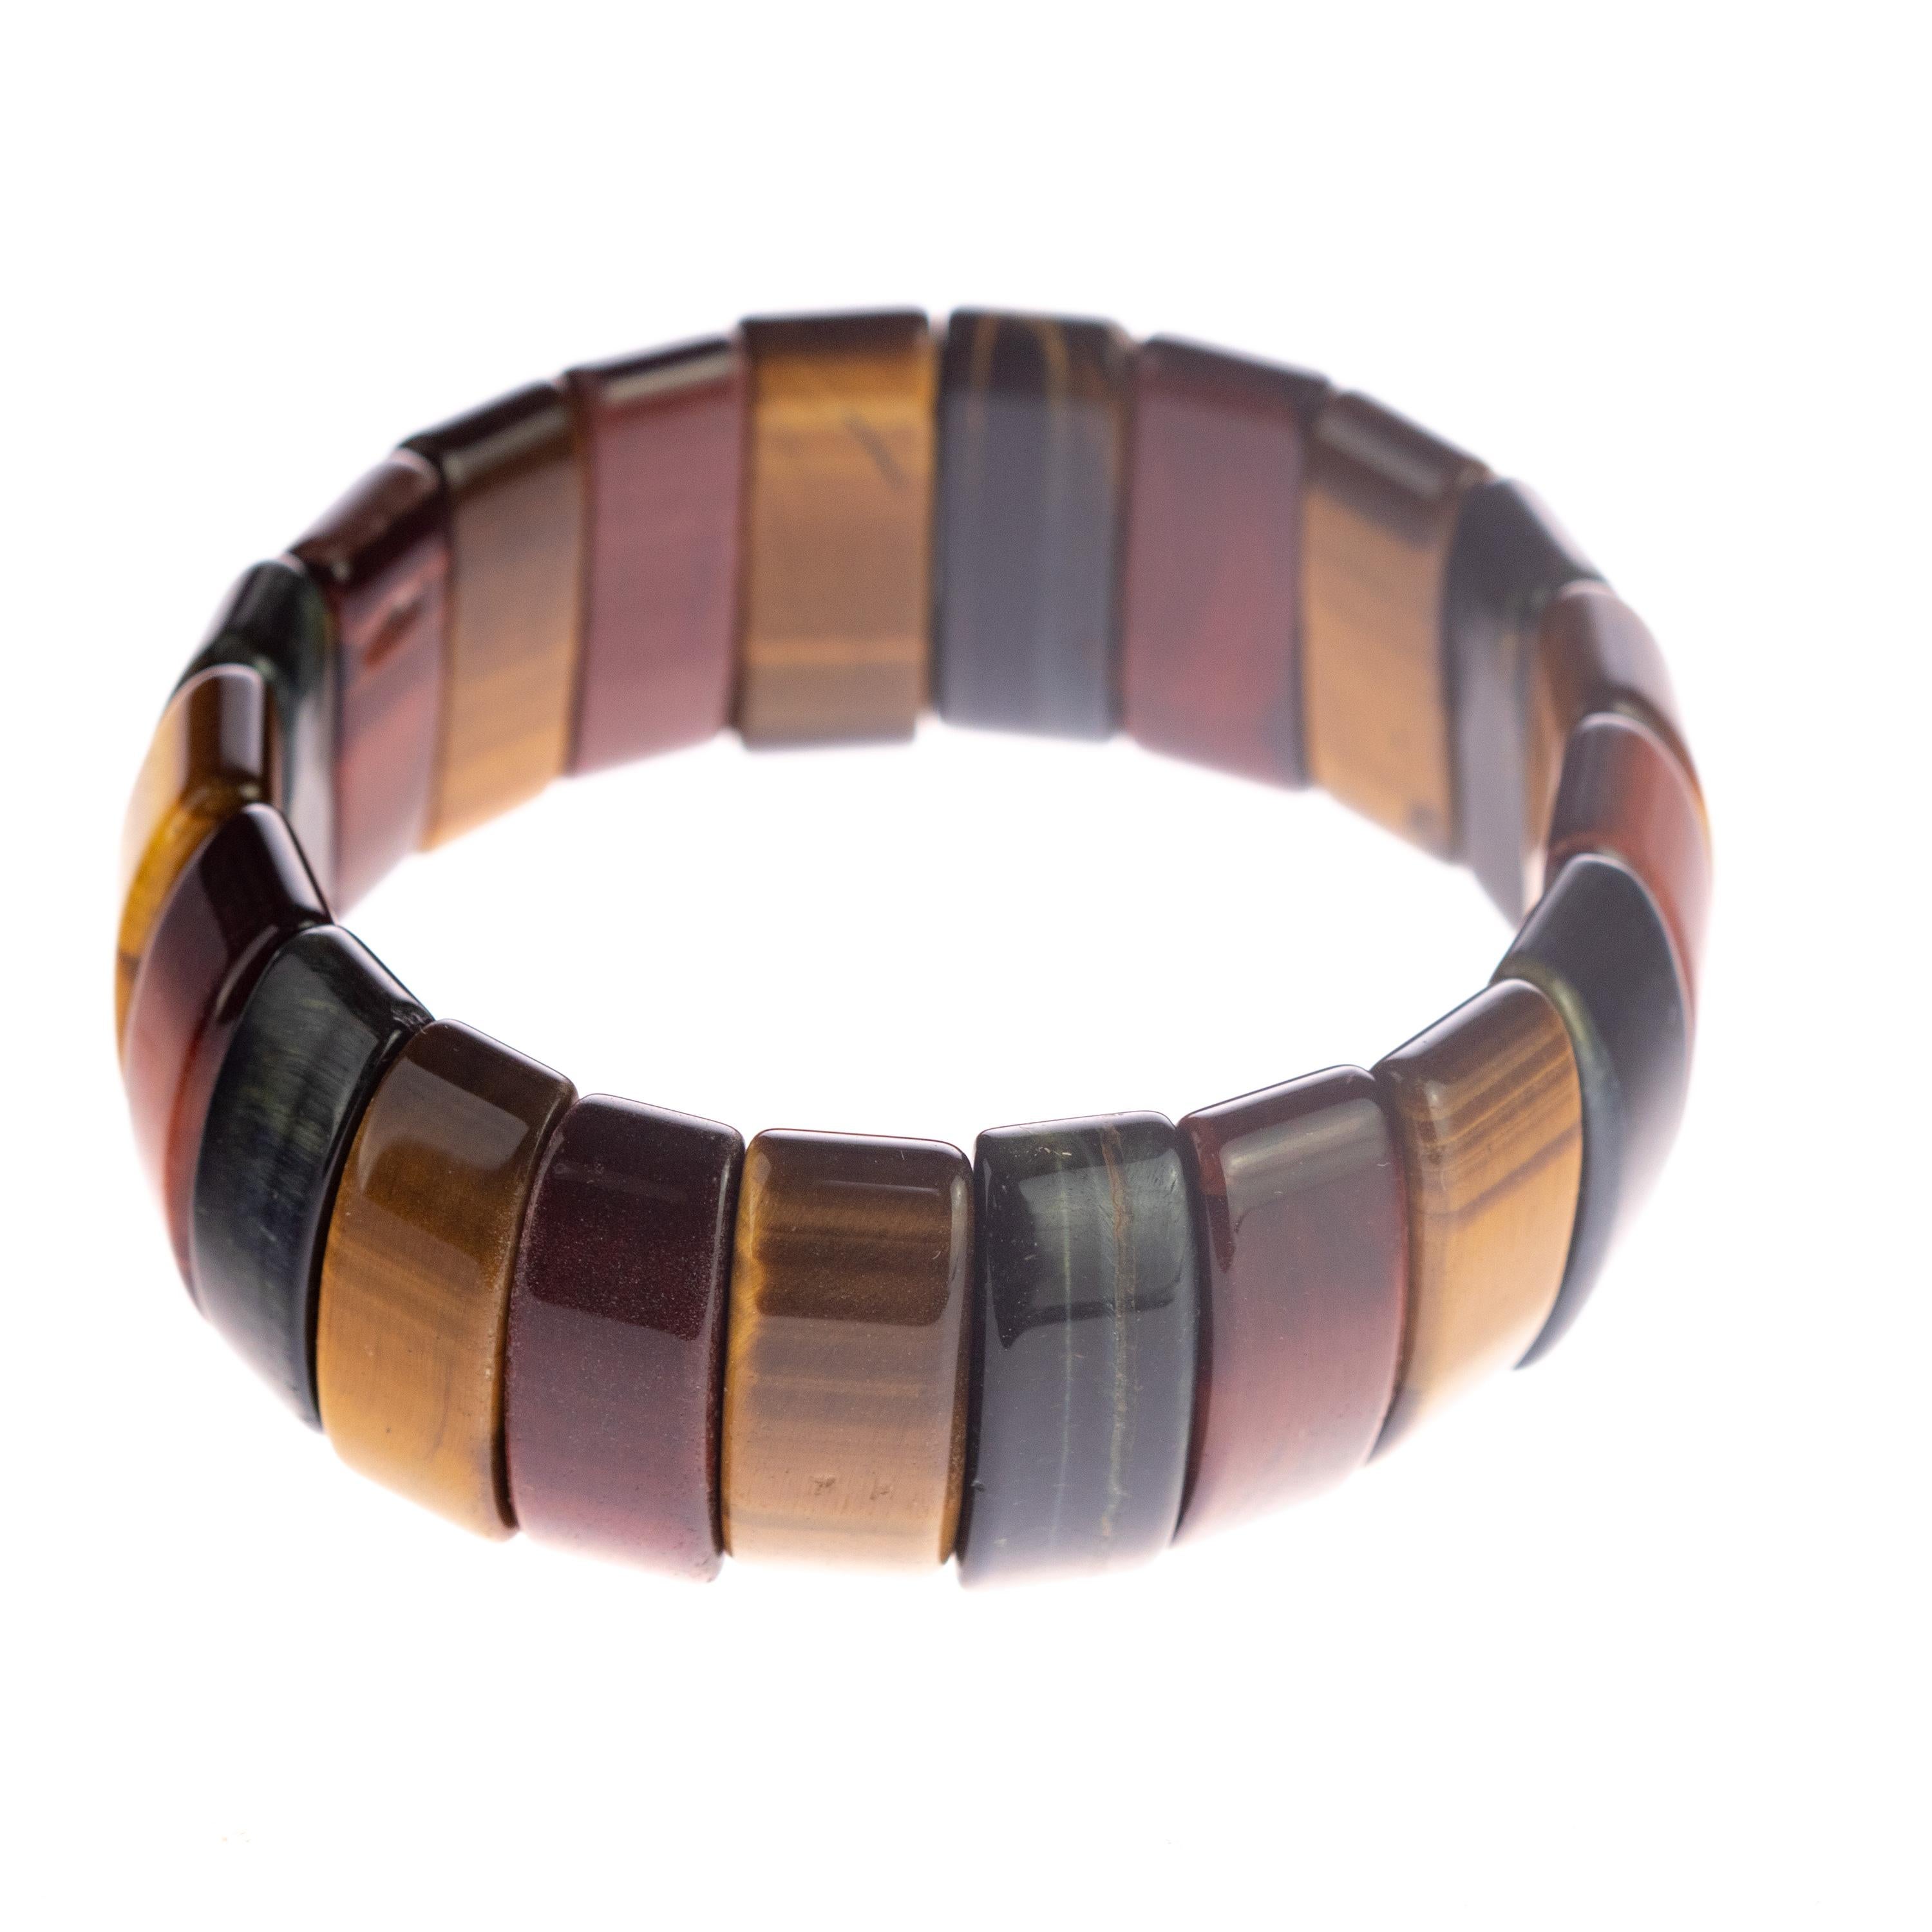 Iconic and stunning Tiger's Eye stretch beaded bracelet. Full of design and beauty. At Intini Jewels we are committed to provide a unique luxury experience, through jewelry designed by us and inspired by beauty and authenticity.

This amazing